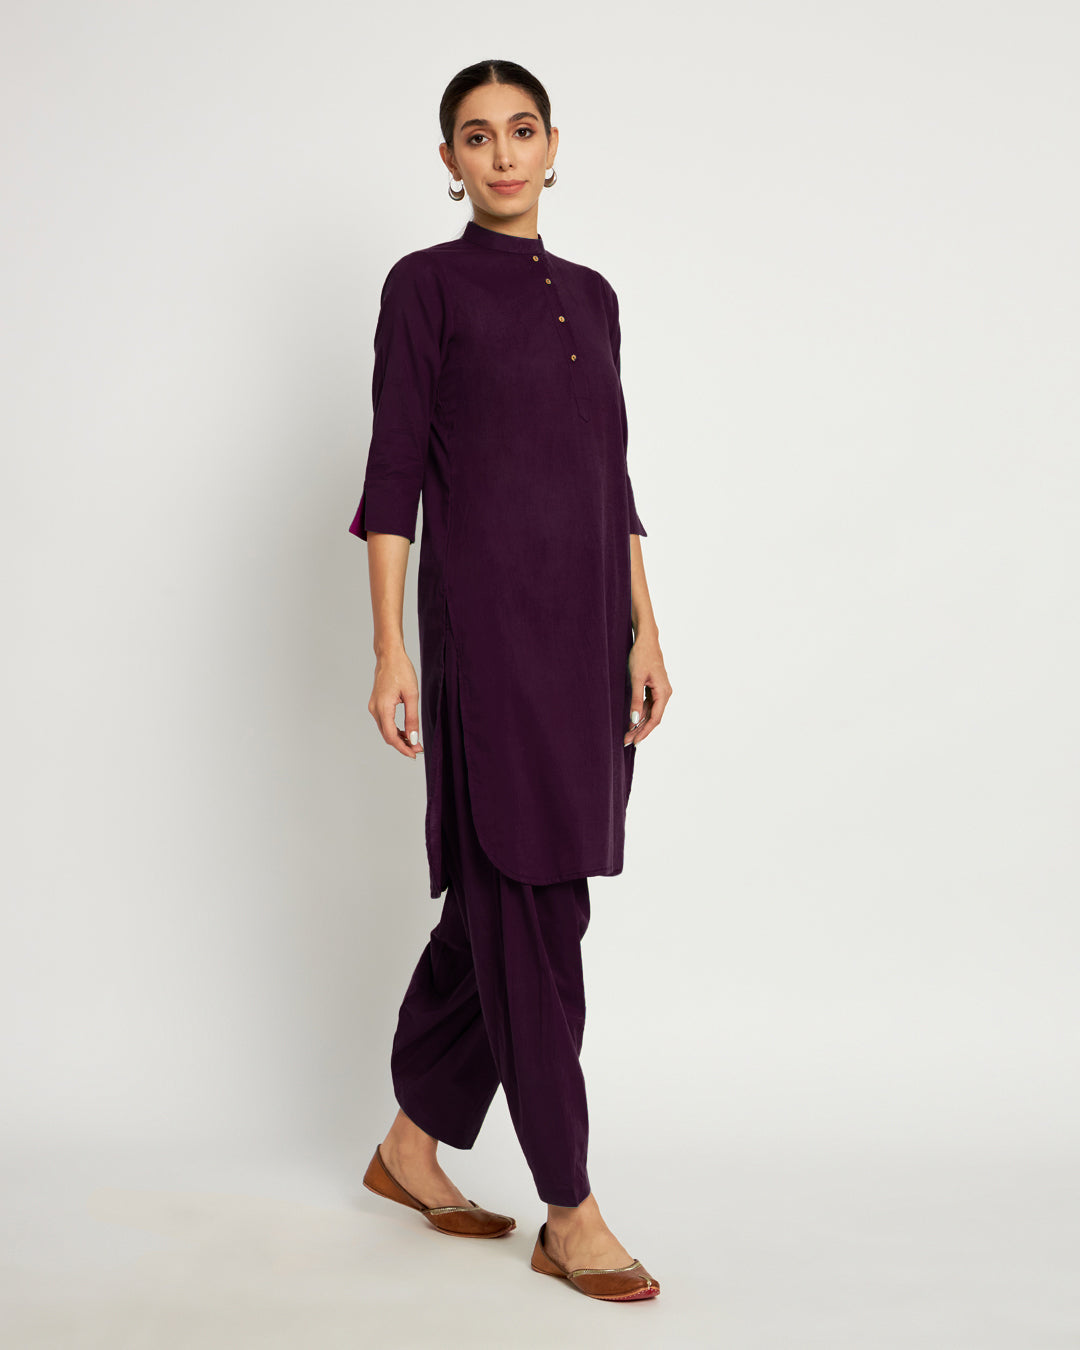 Plum Passion Band Collar Neck Solid Kurta (Without Bottoms)